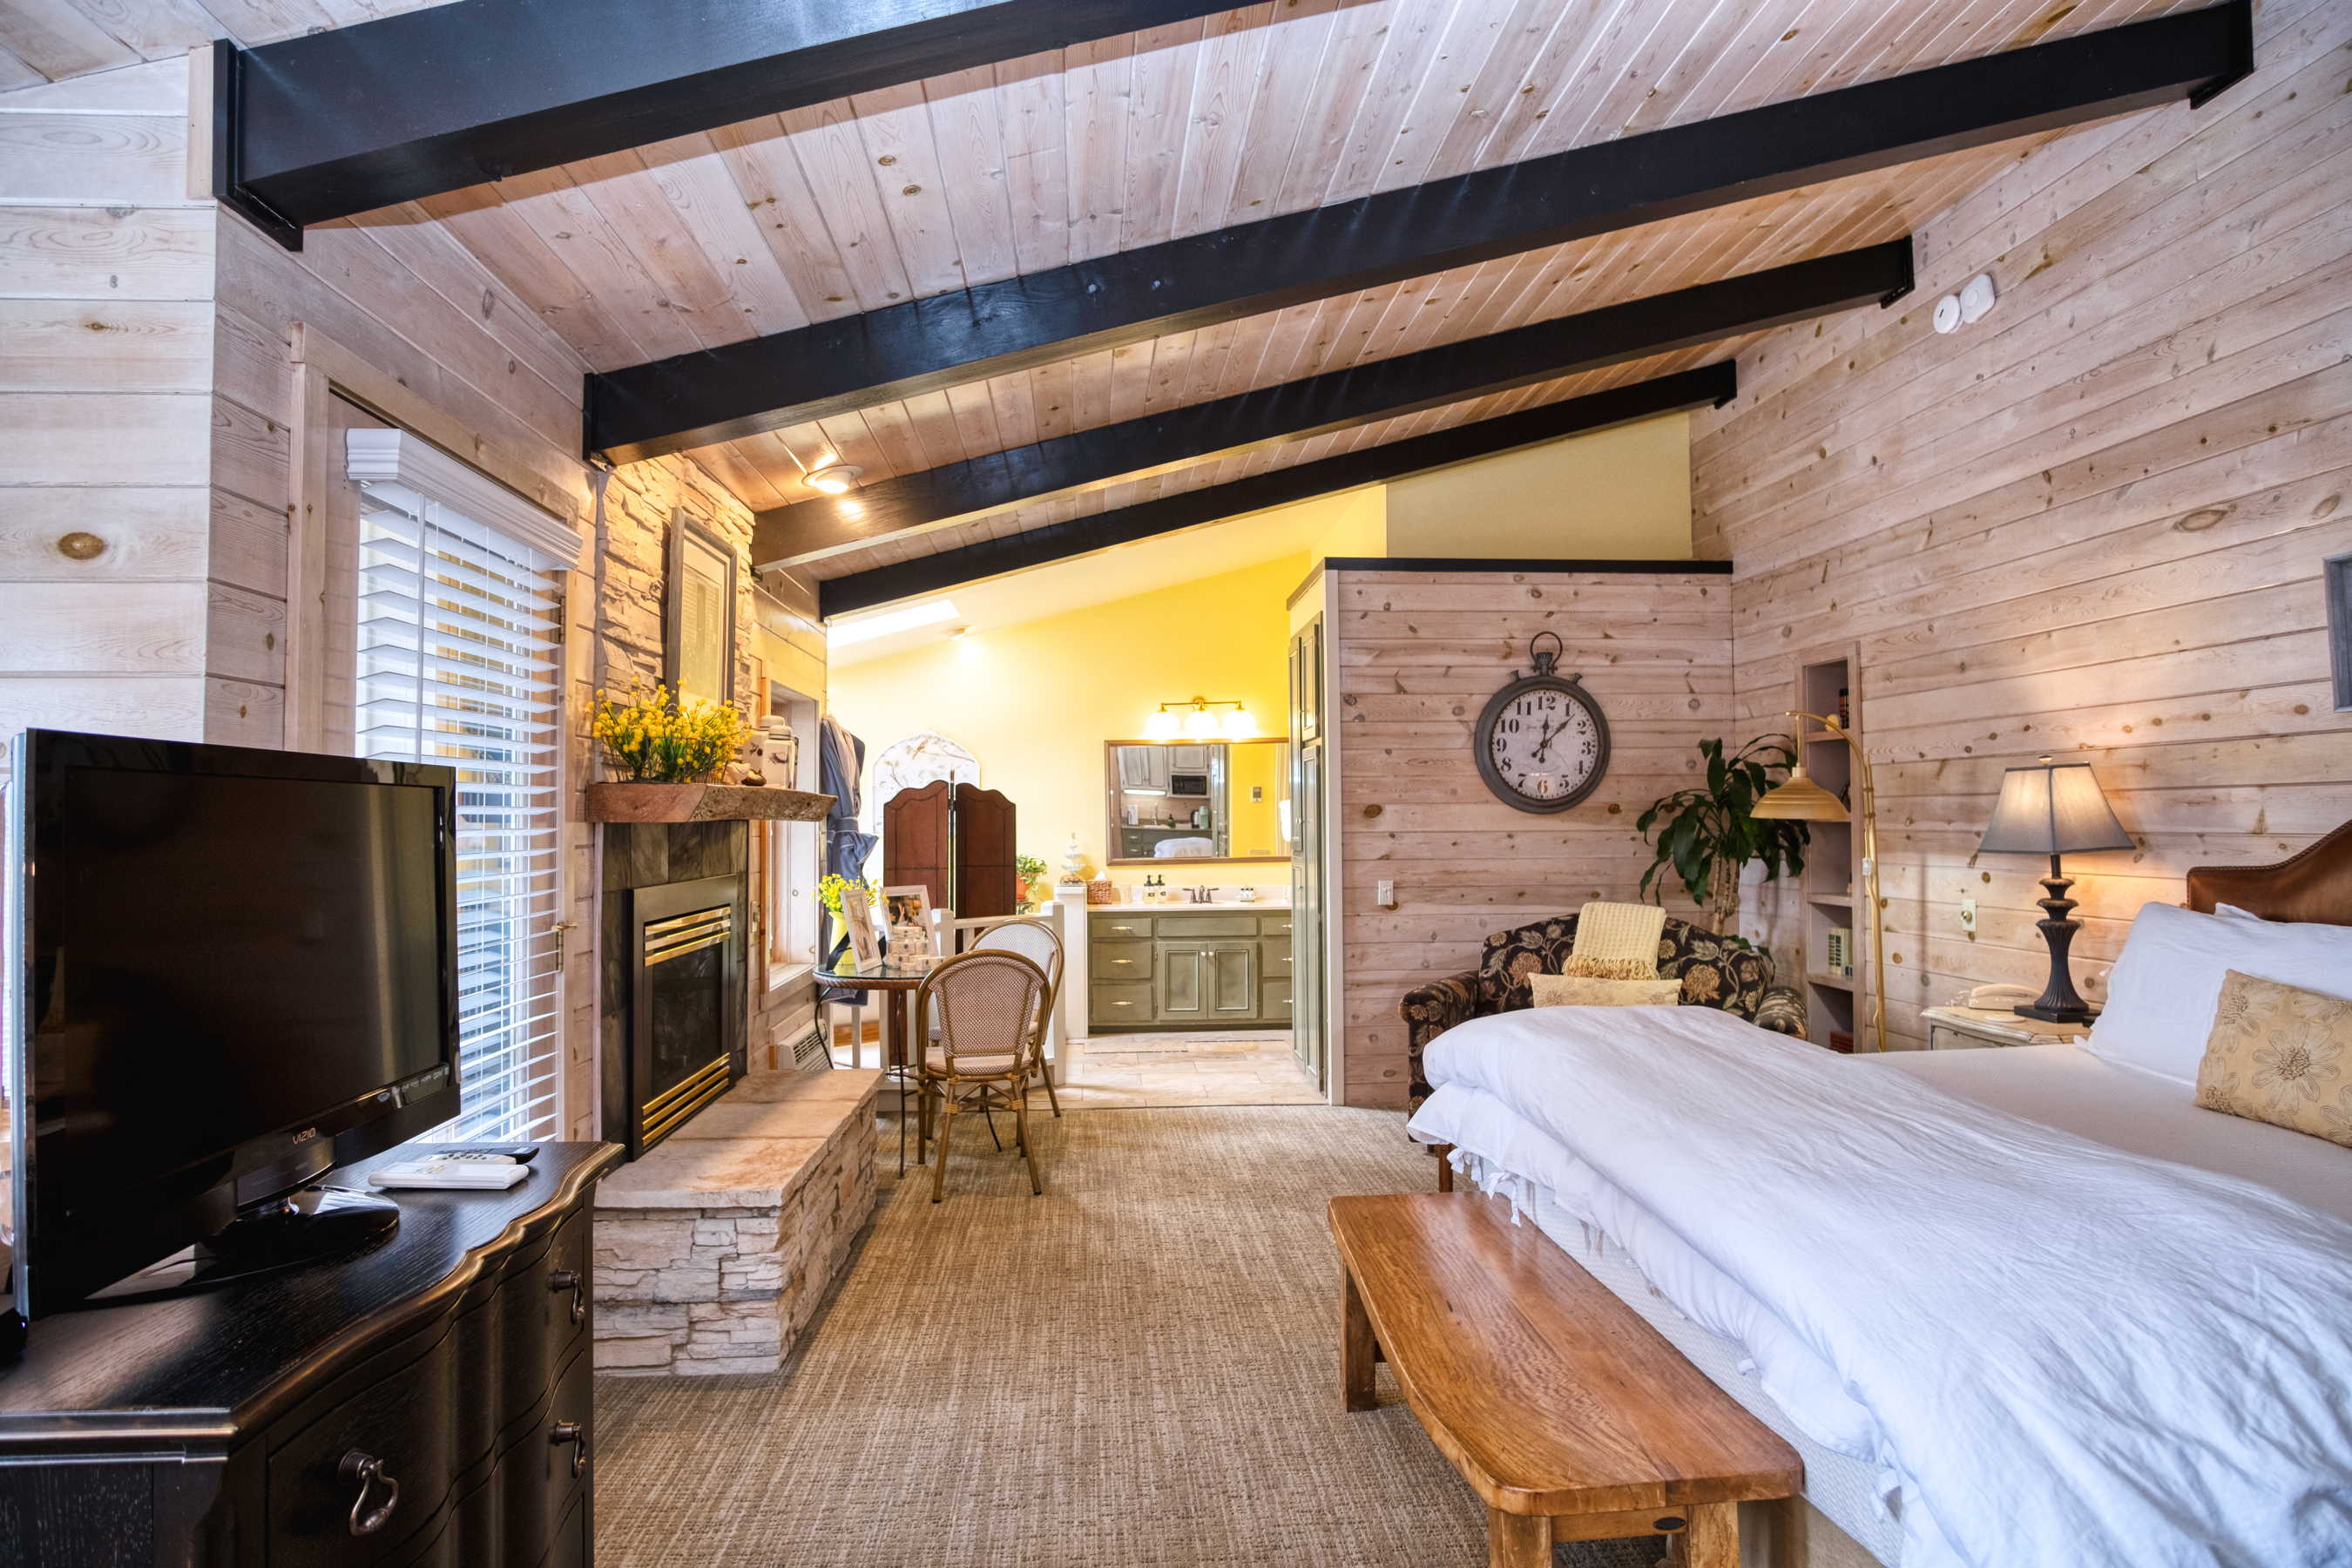 The sunrise Suite at Country Willows Inn & Estate in Ashland, Oregon has a charming, sunny interior with a fireplace, oversize roman soaking tub, heated bathroom floors, and a large private deck overlooking the mountainside.